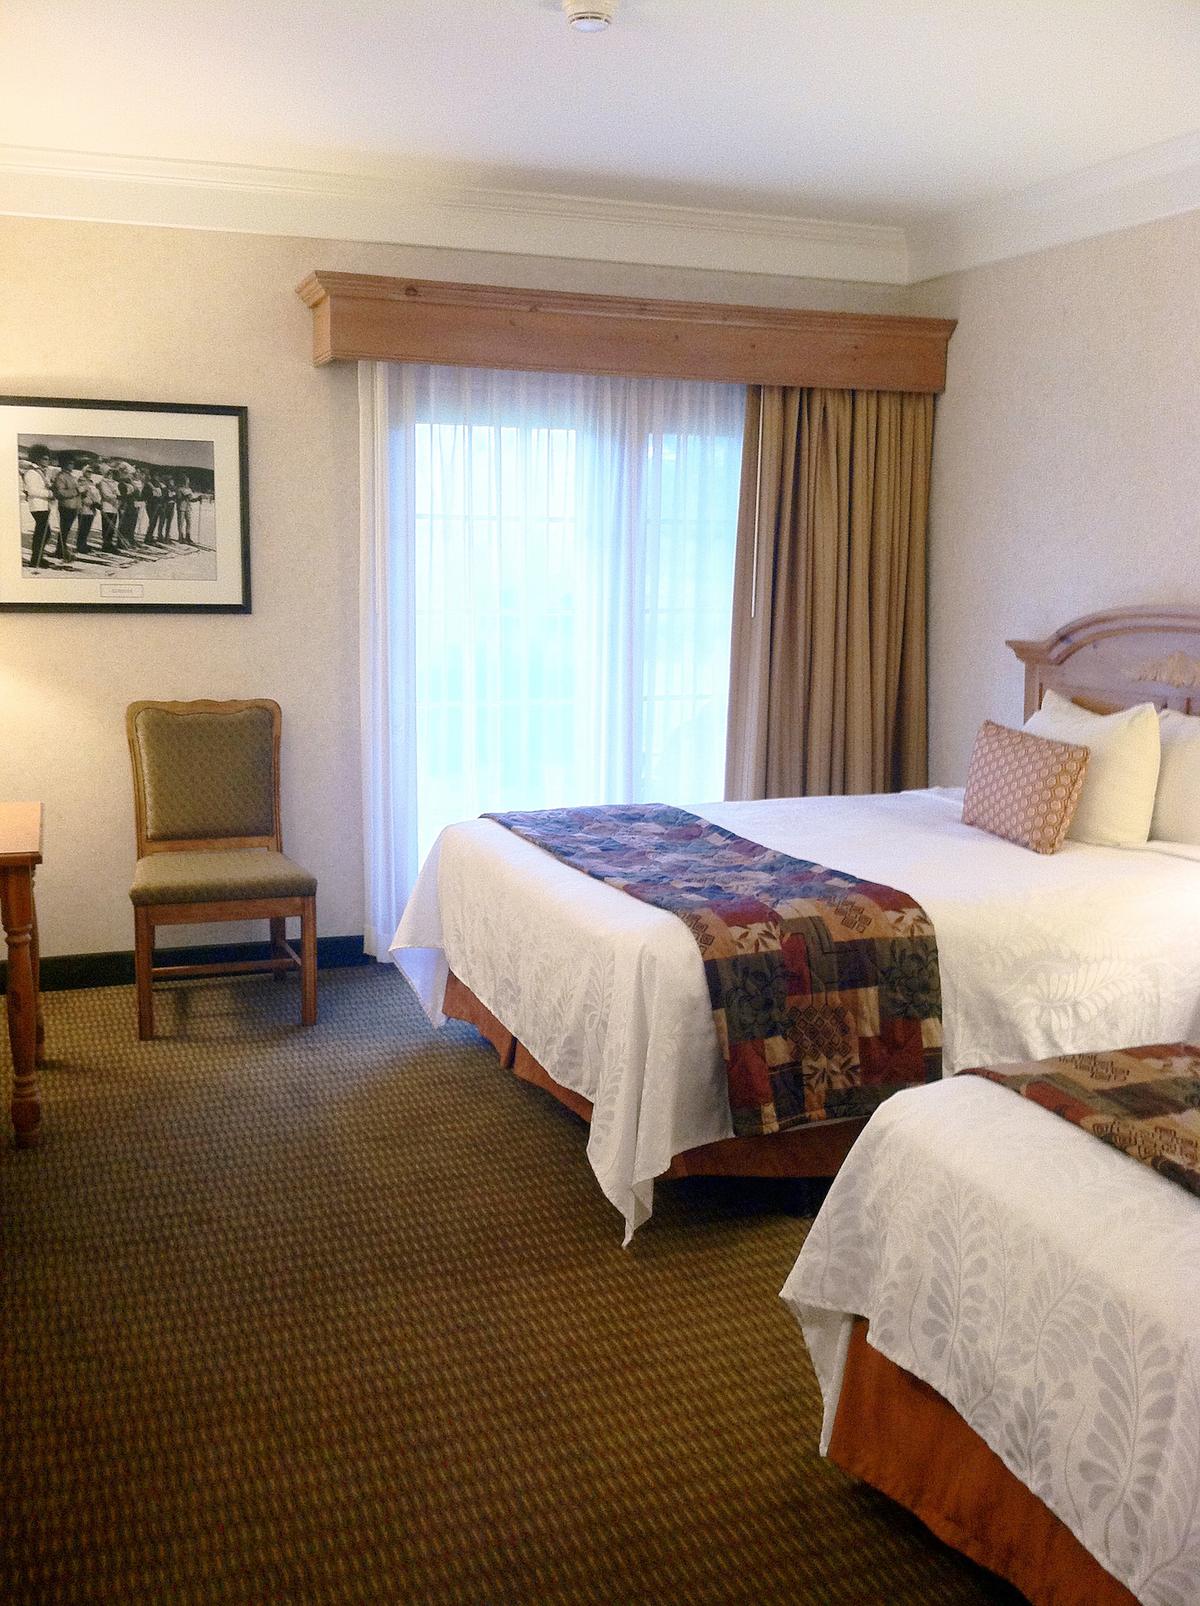 A resort standard room at the Inn at Holiday Valley. (Courtesy of Holiday Valley)